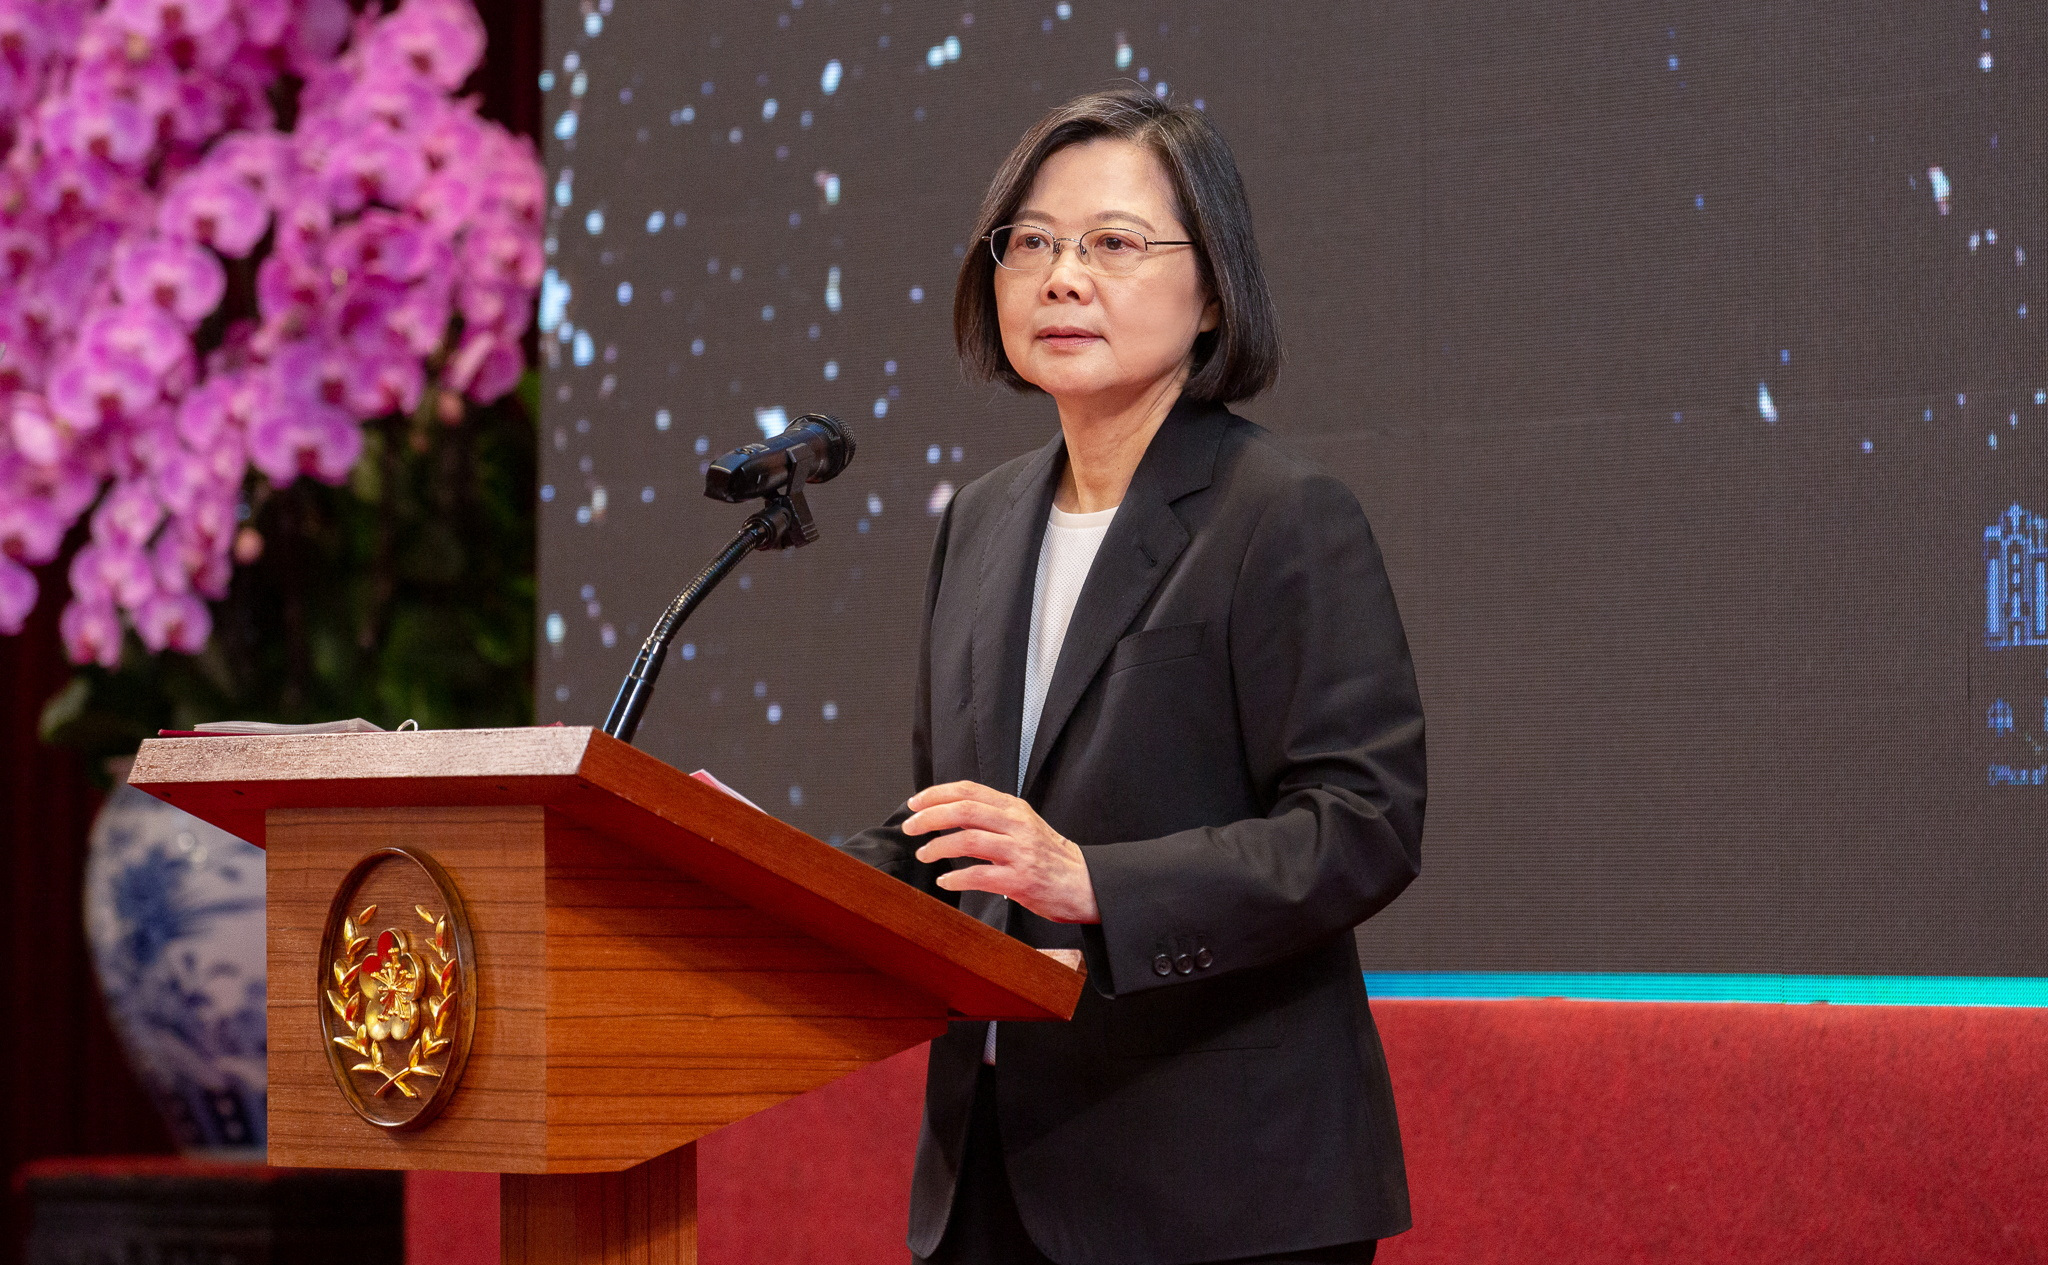 President Tsai Ing-wen of Taiwan delivers a speech on the 7th anniversary of her inauguration in Taipei